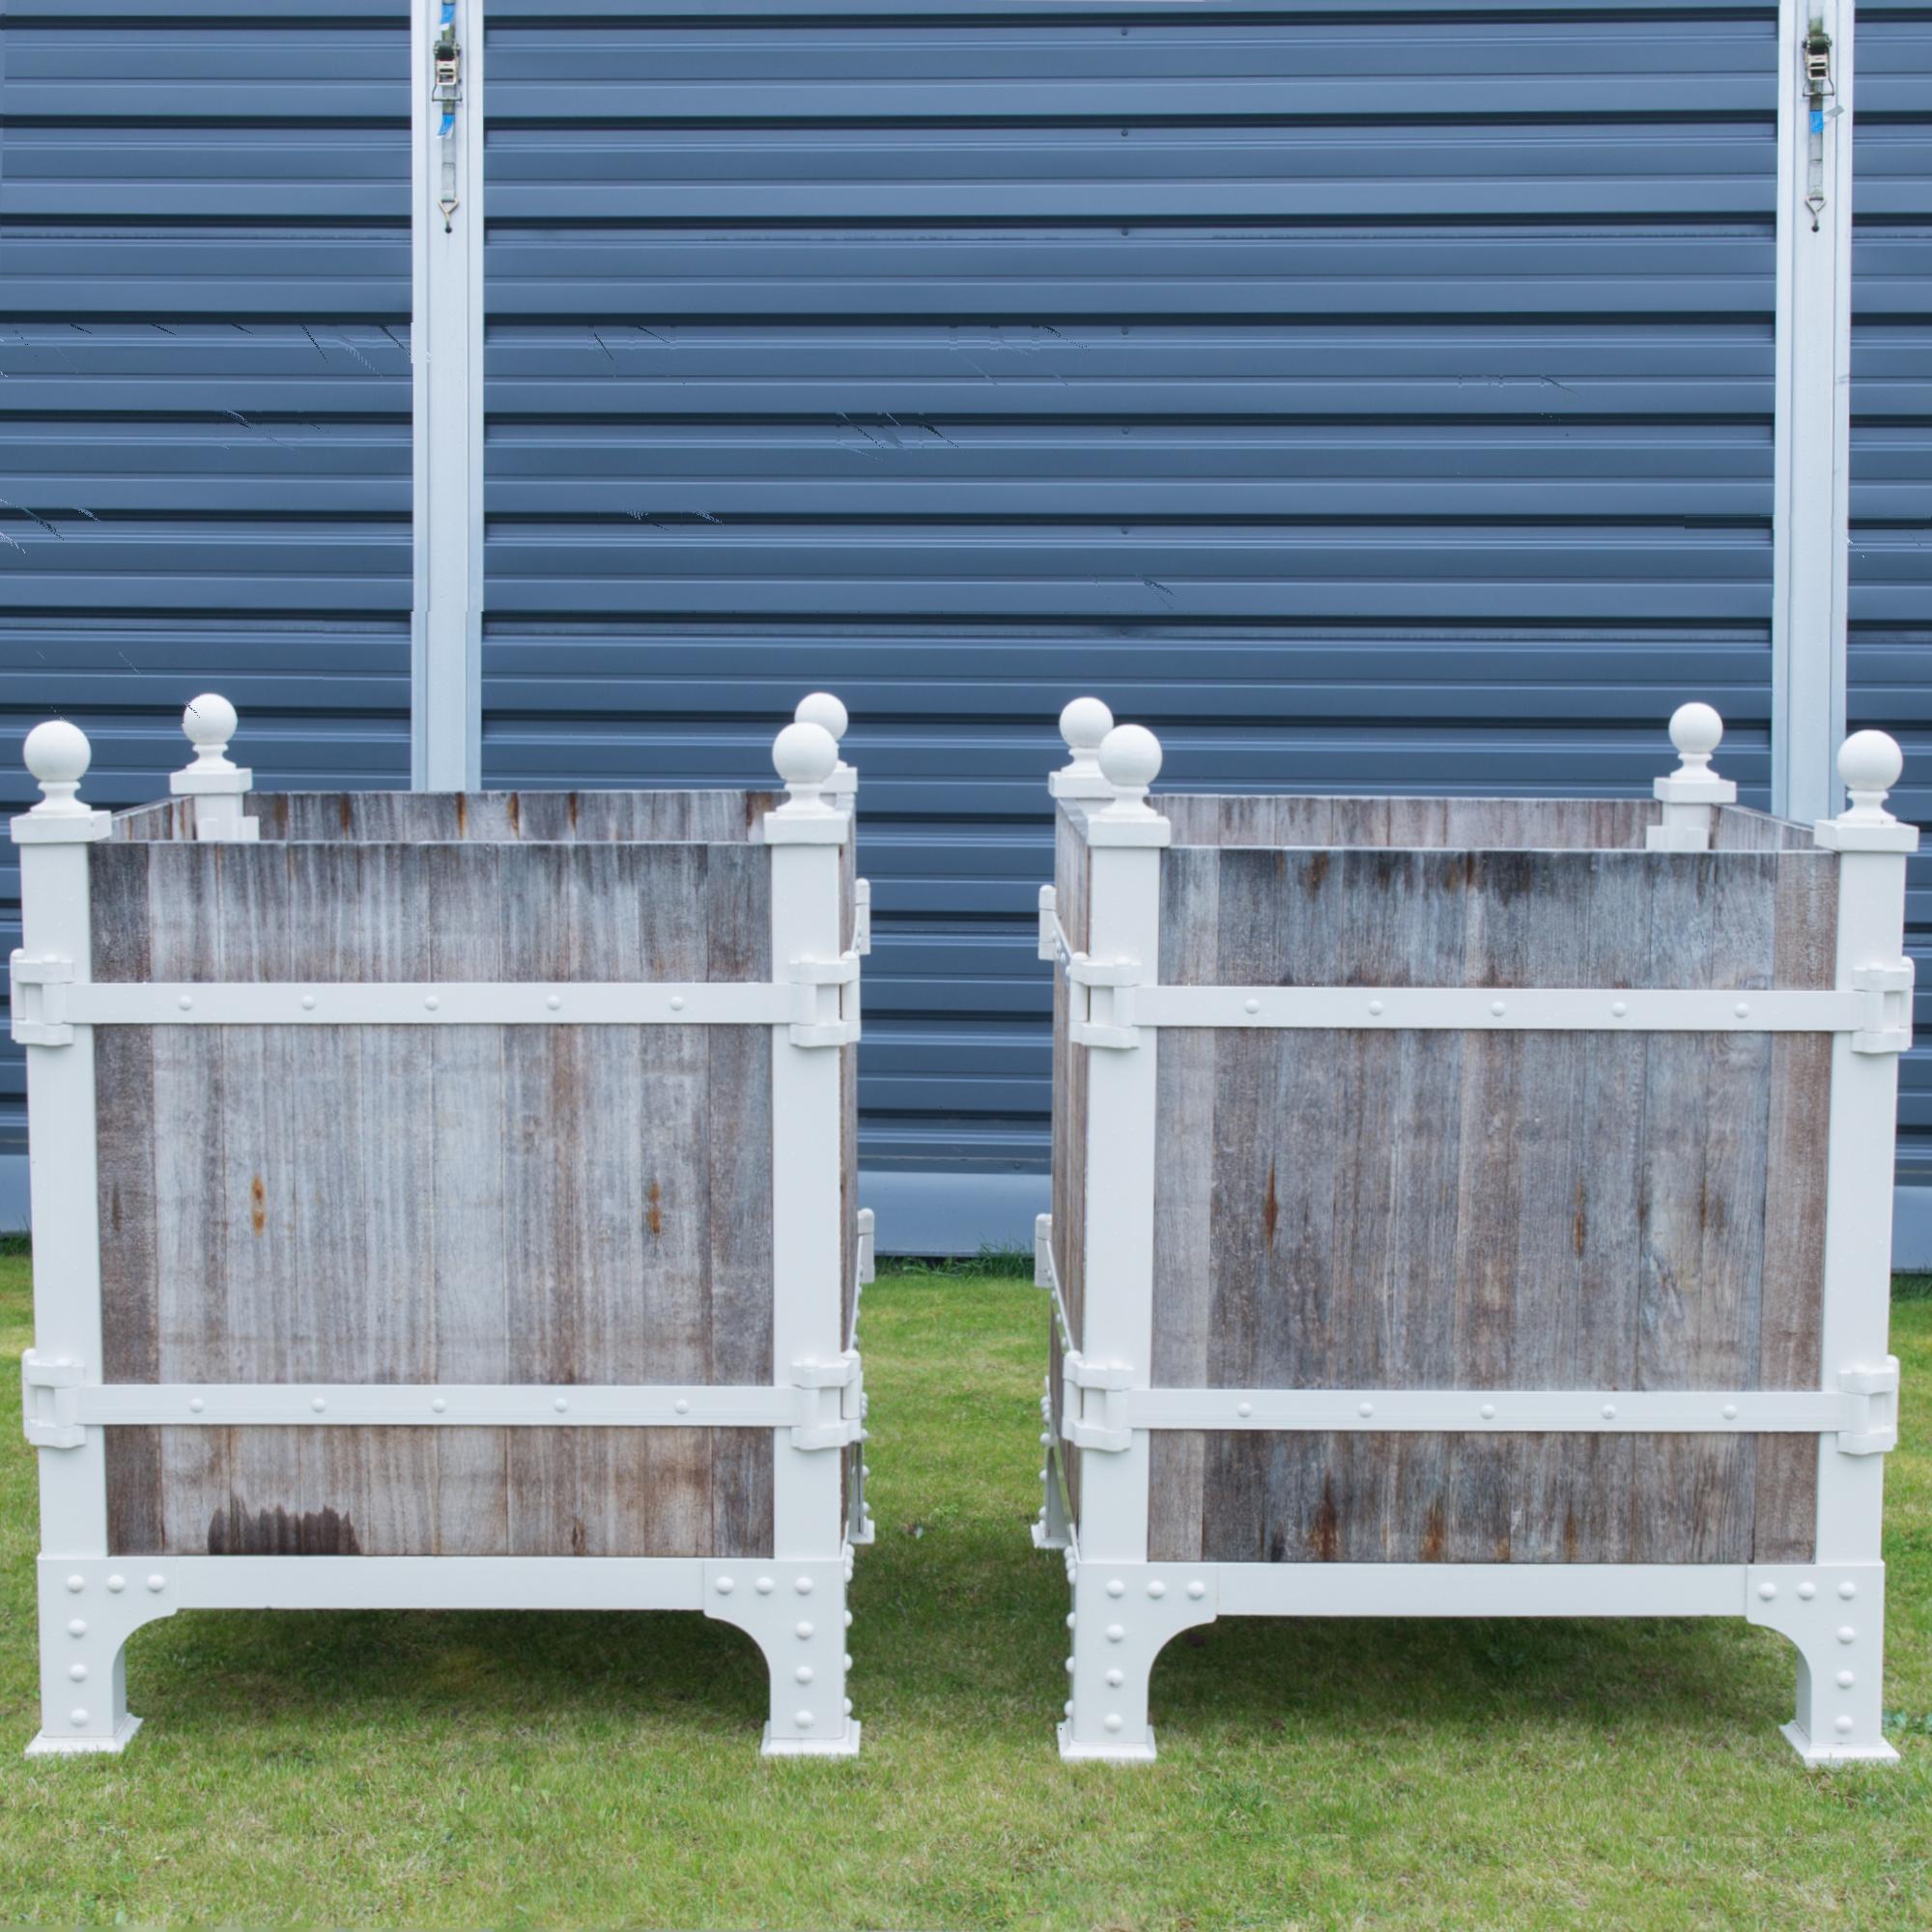 A pair of planters from Poland. A frame of steel girders and rustic wooden boards creates a refined industrial aesthetic. The metal is painted a crisp white, making a striking contrast with the natural finish and muted grey and blue tones of the